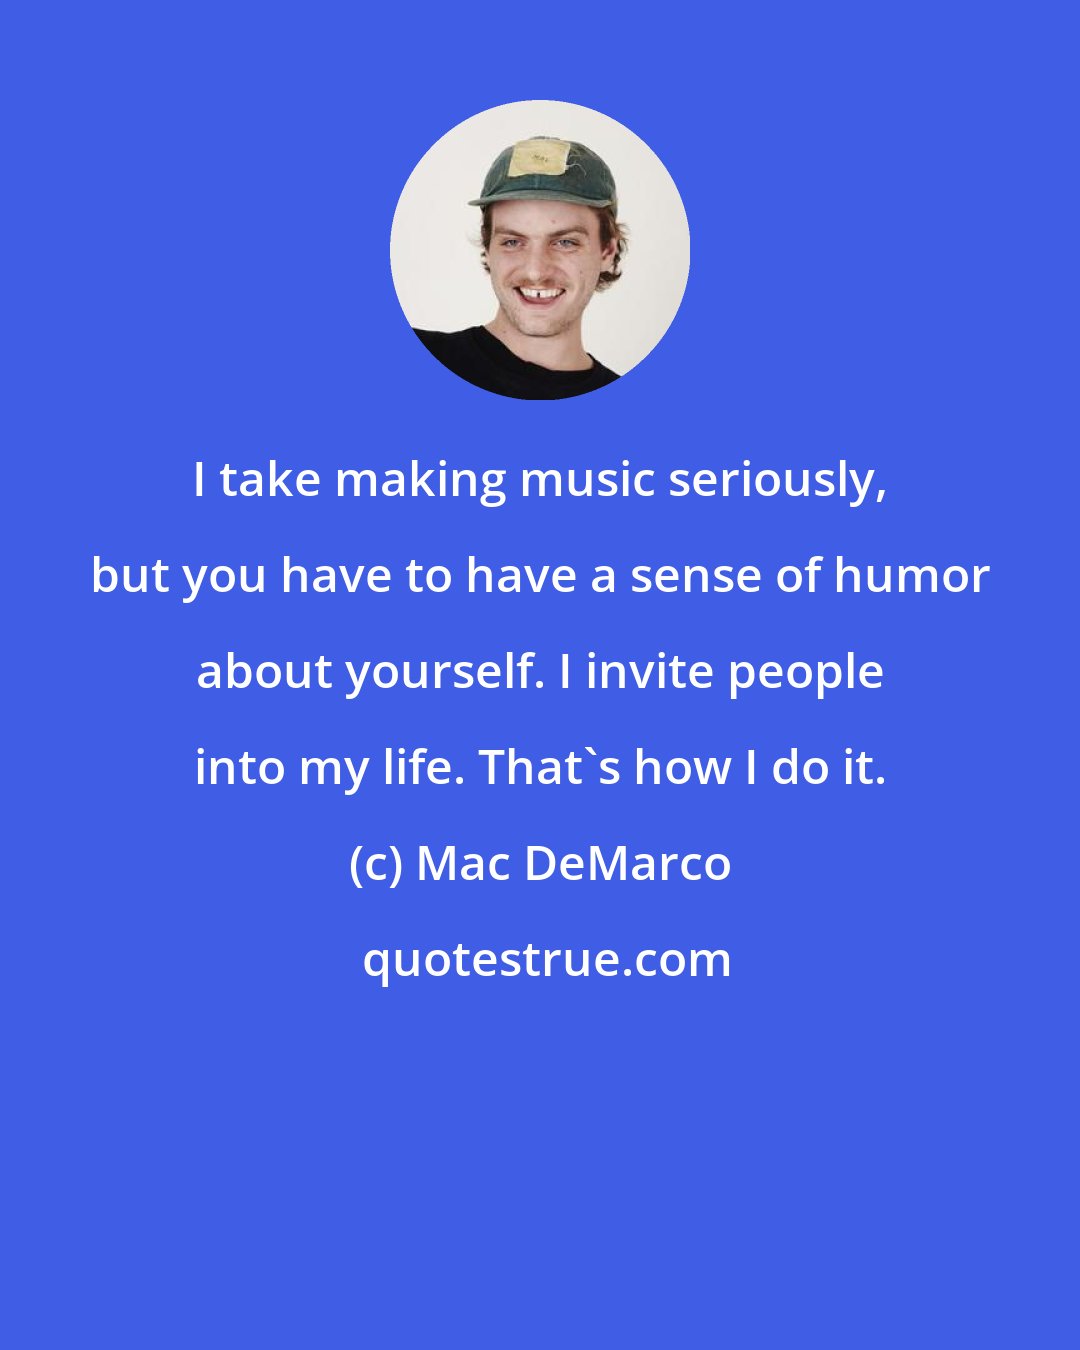 Mac DeMarco: I take making music seriously, but you have to have a sense of humor about yourself. I invite people into my life. That's how I do it.